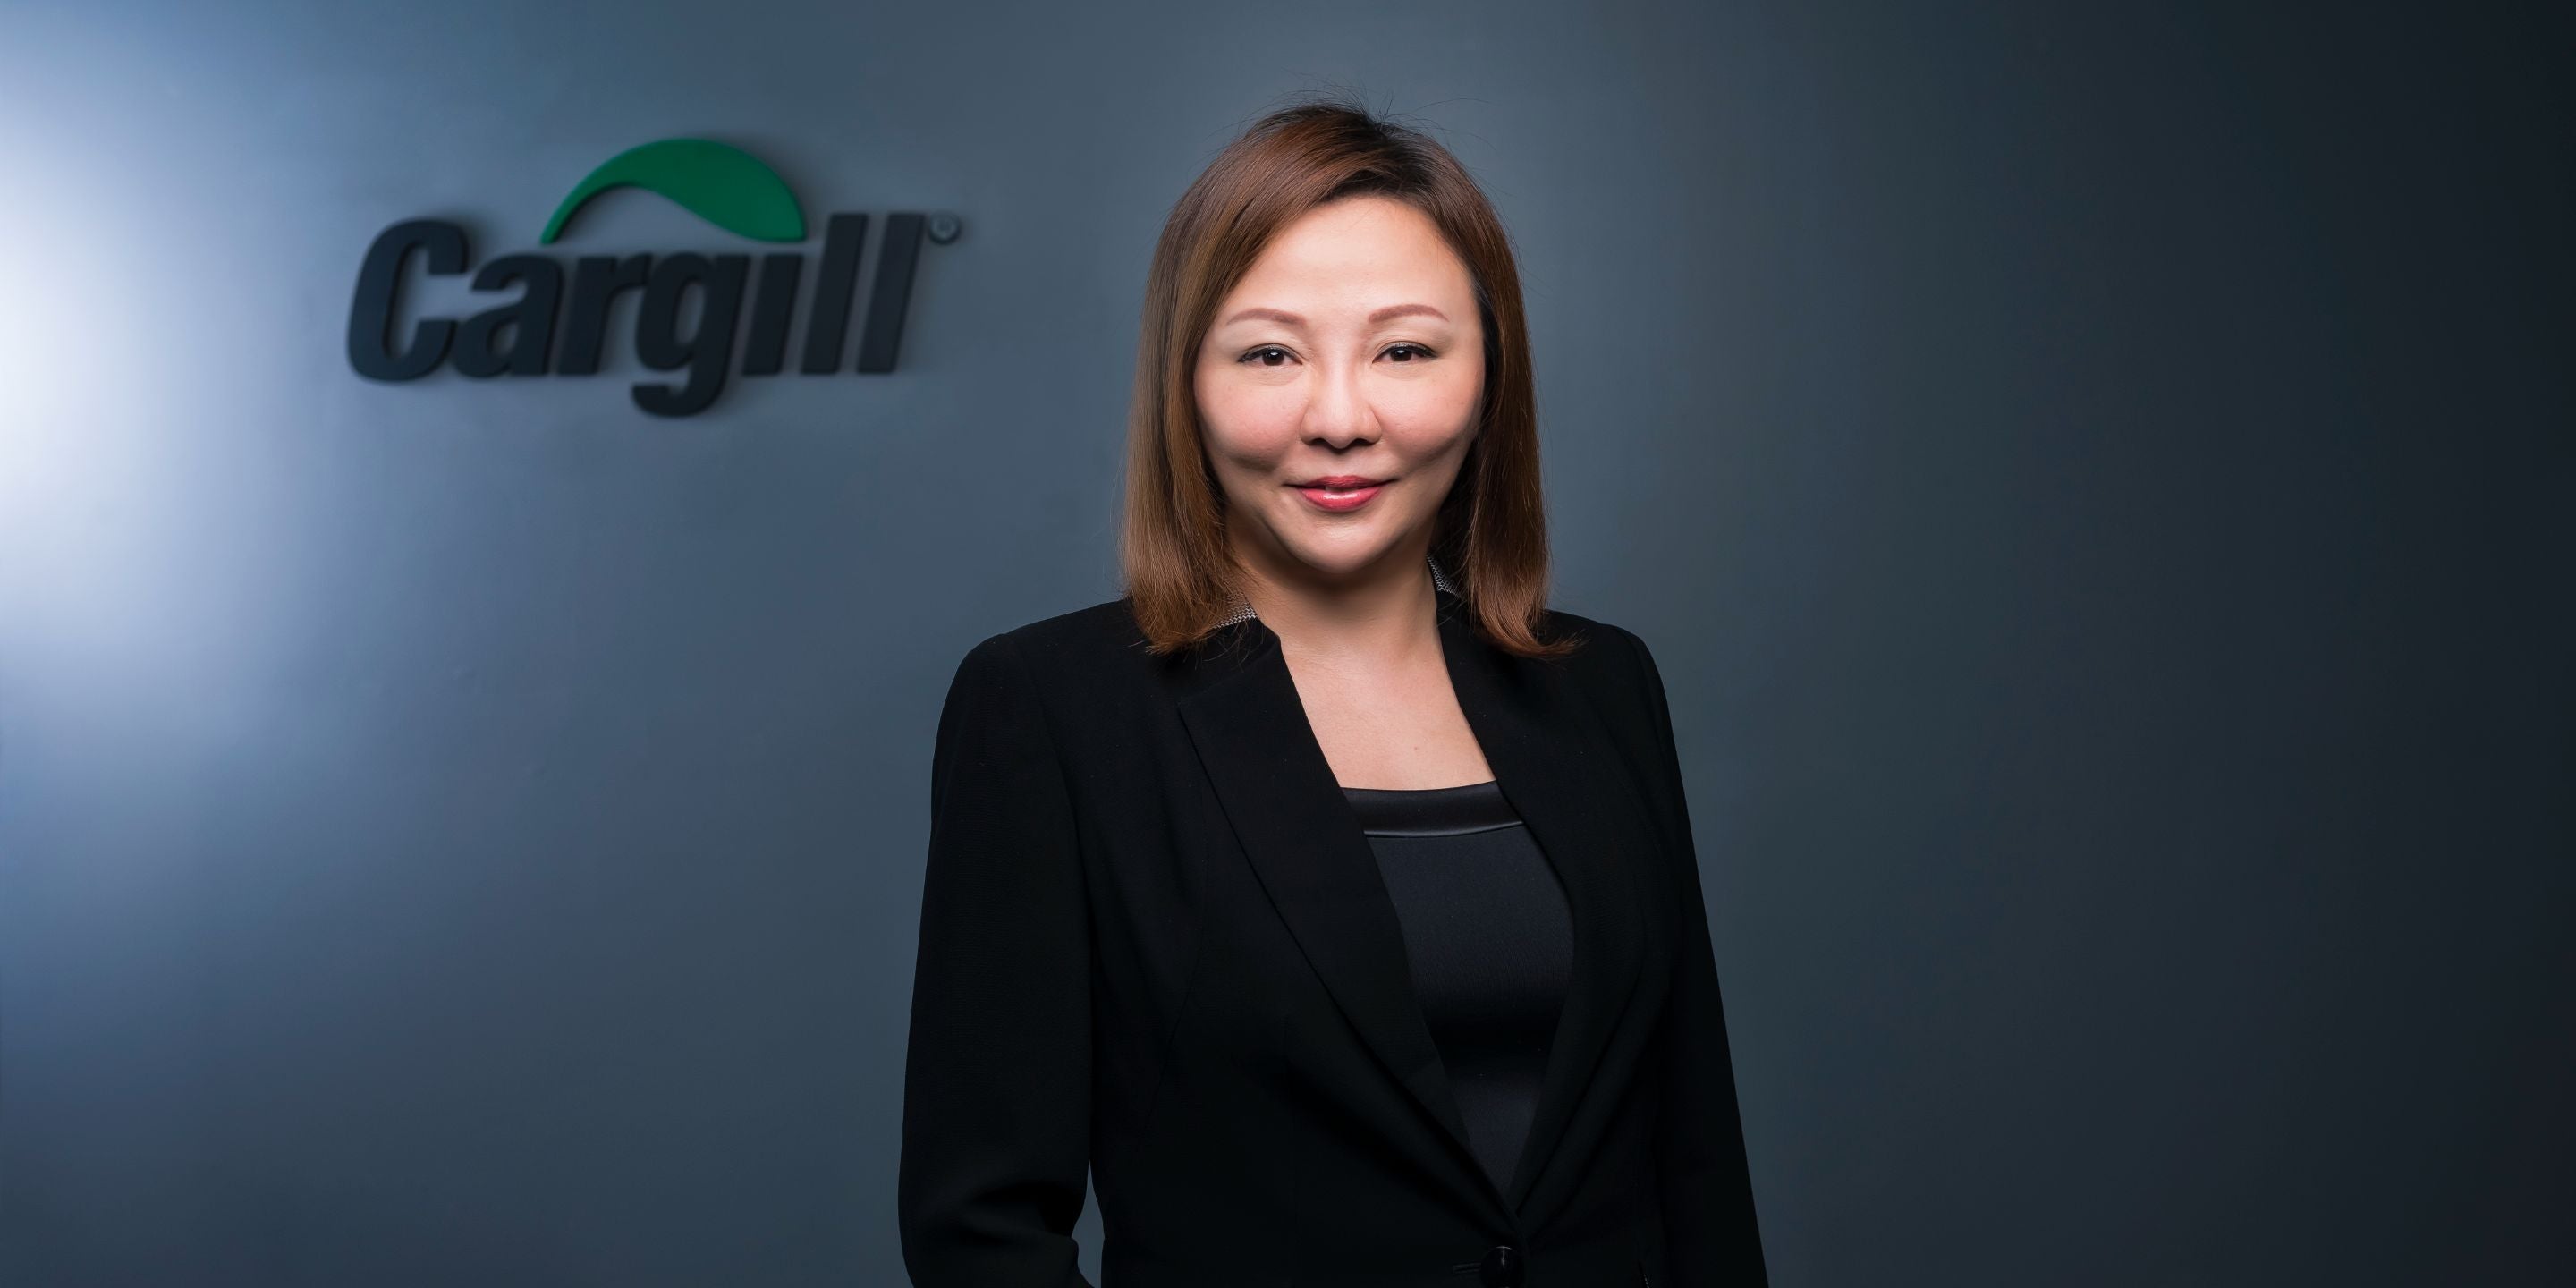 HC Insider - Ying Ying Lim, MD at Cargill OT: “The best trader I hired had a master’s in music from Cambridge”